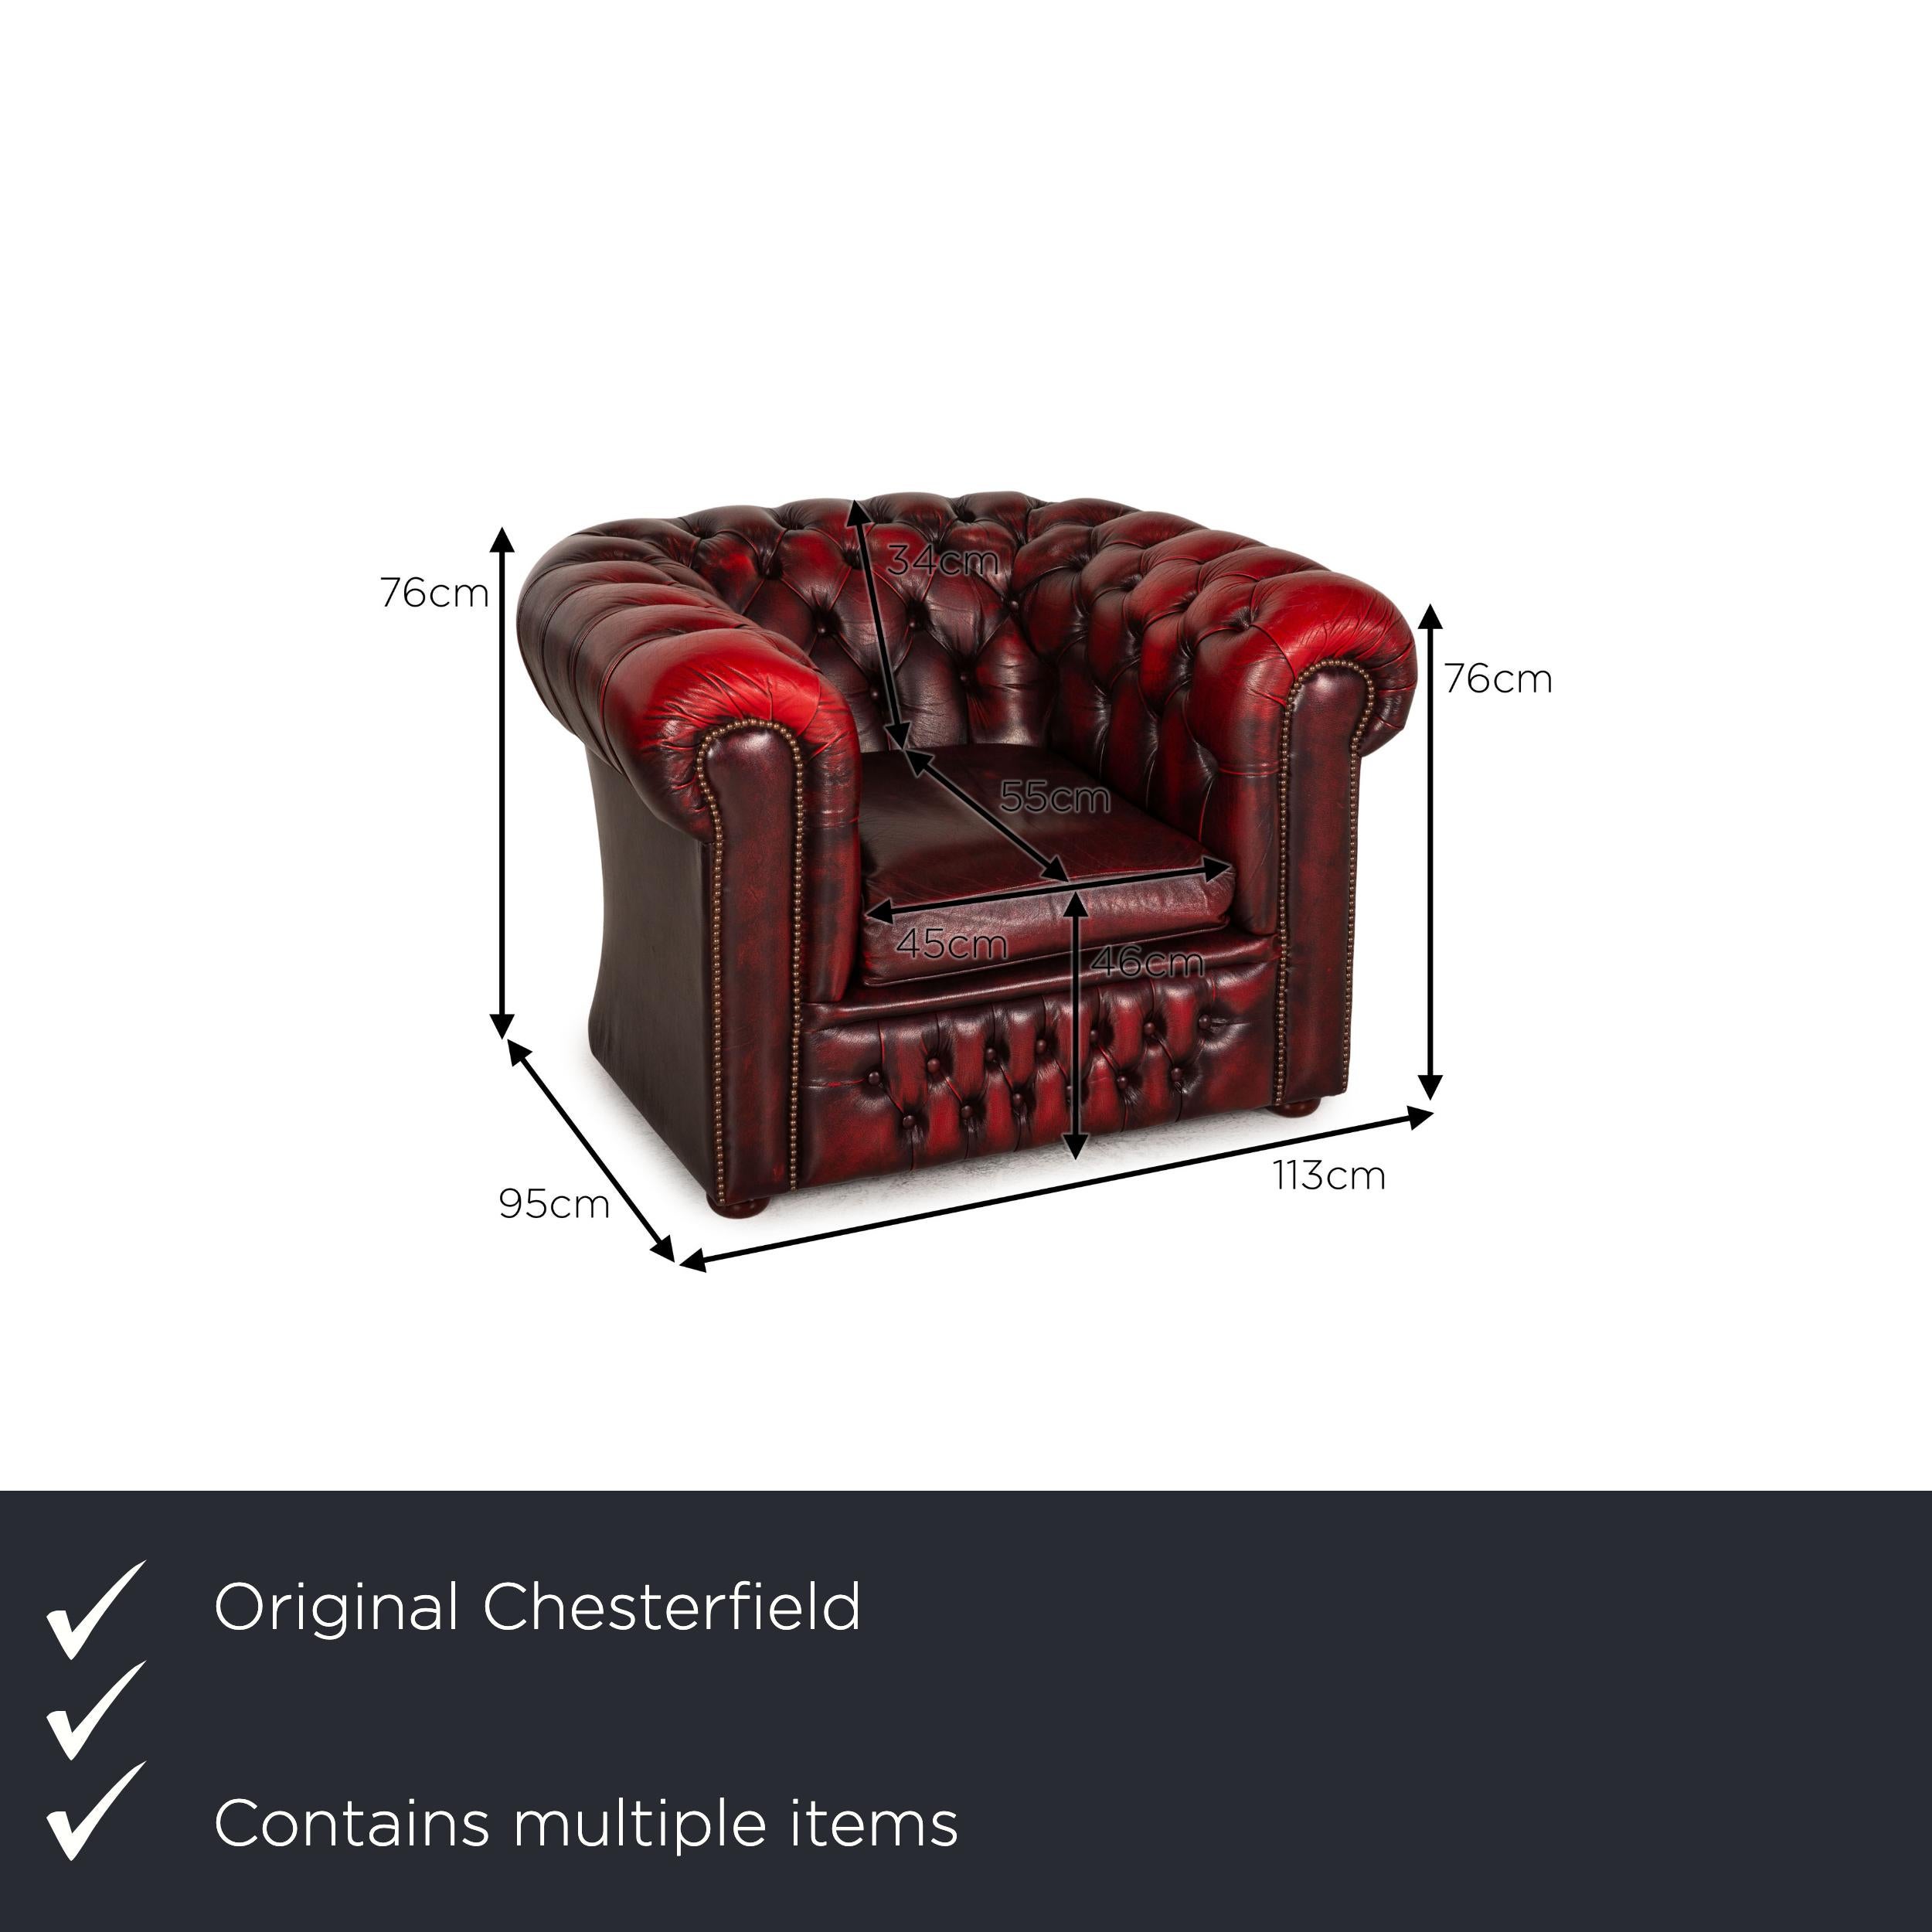 We present to you a Chesterfield Tudor leather armchair set dark red.

Product measurements in centimeters:

depth: 95
width: 113
height: 76
seat height: 46
rest height: 76
seat depth: 55
seat width: 45
back height: 34.

 